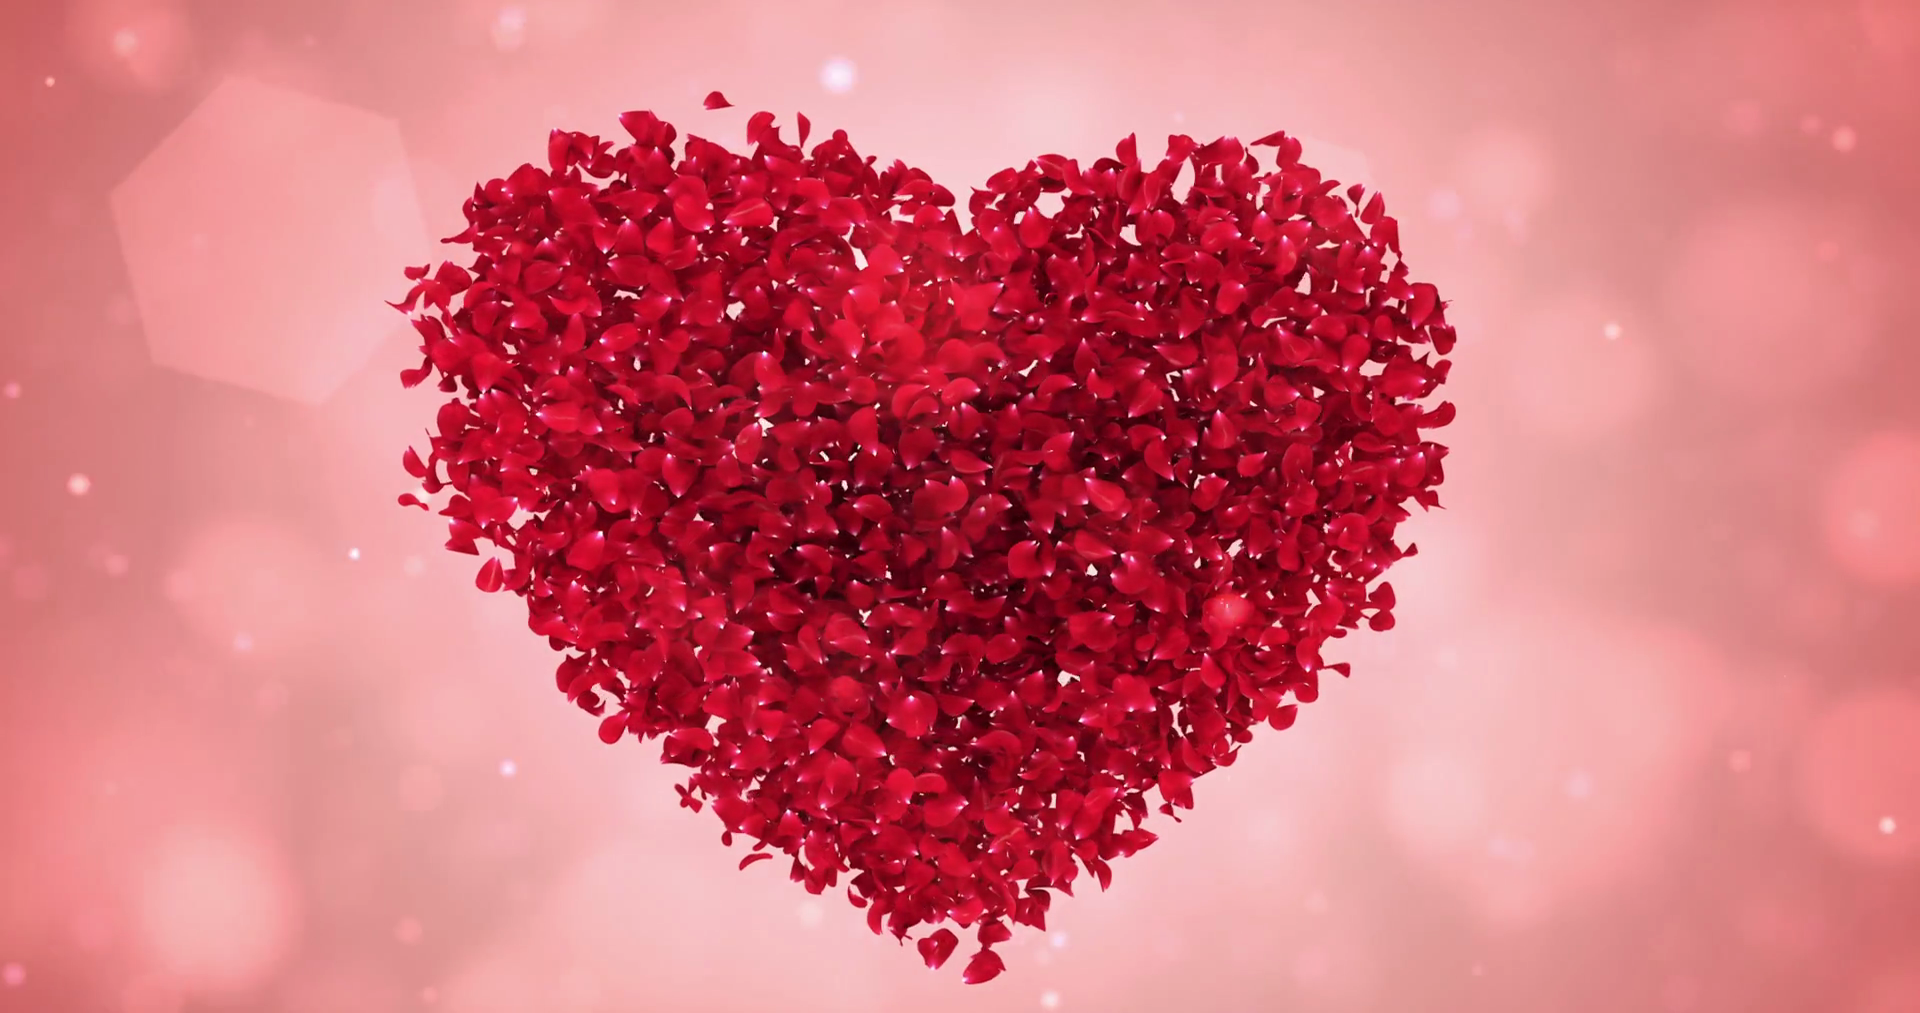 Rotating Red Rose Flower Petals In Lovely Heart Shape Background ...